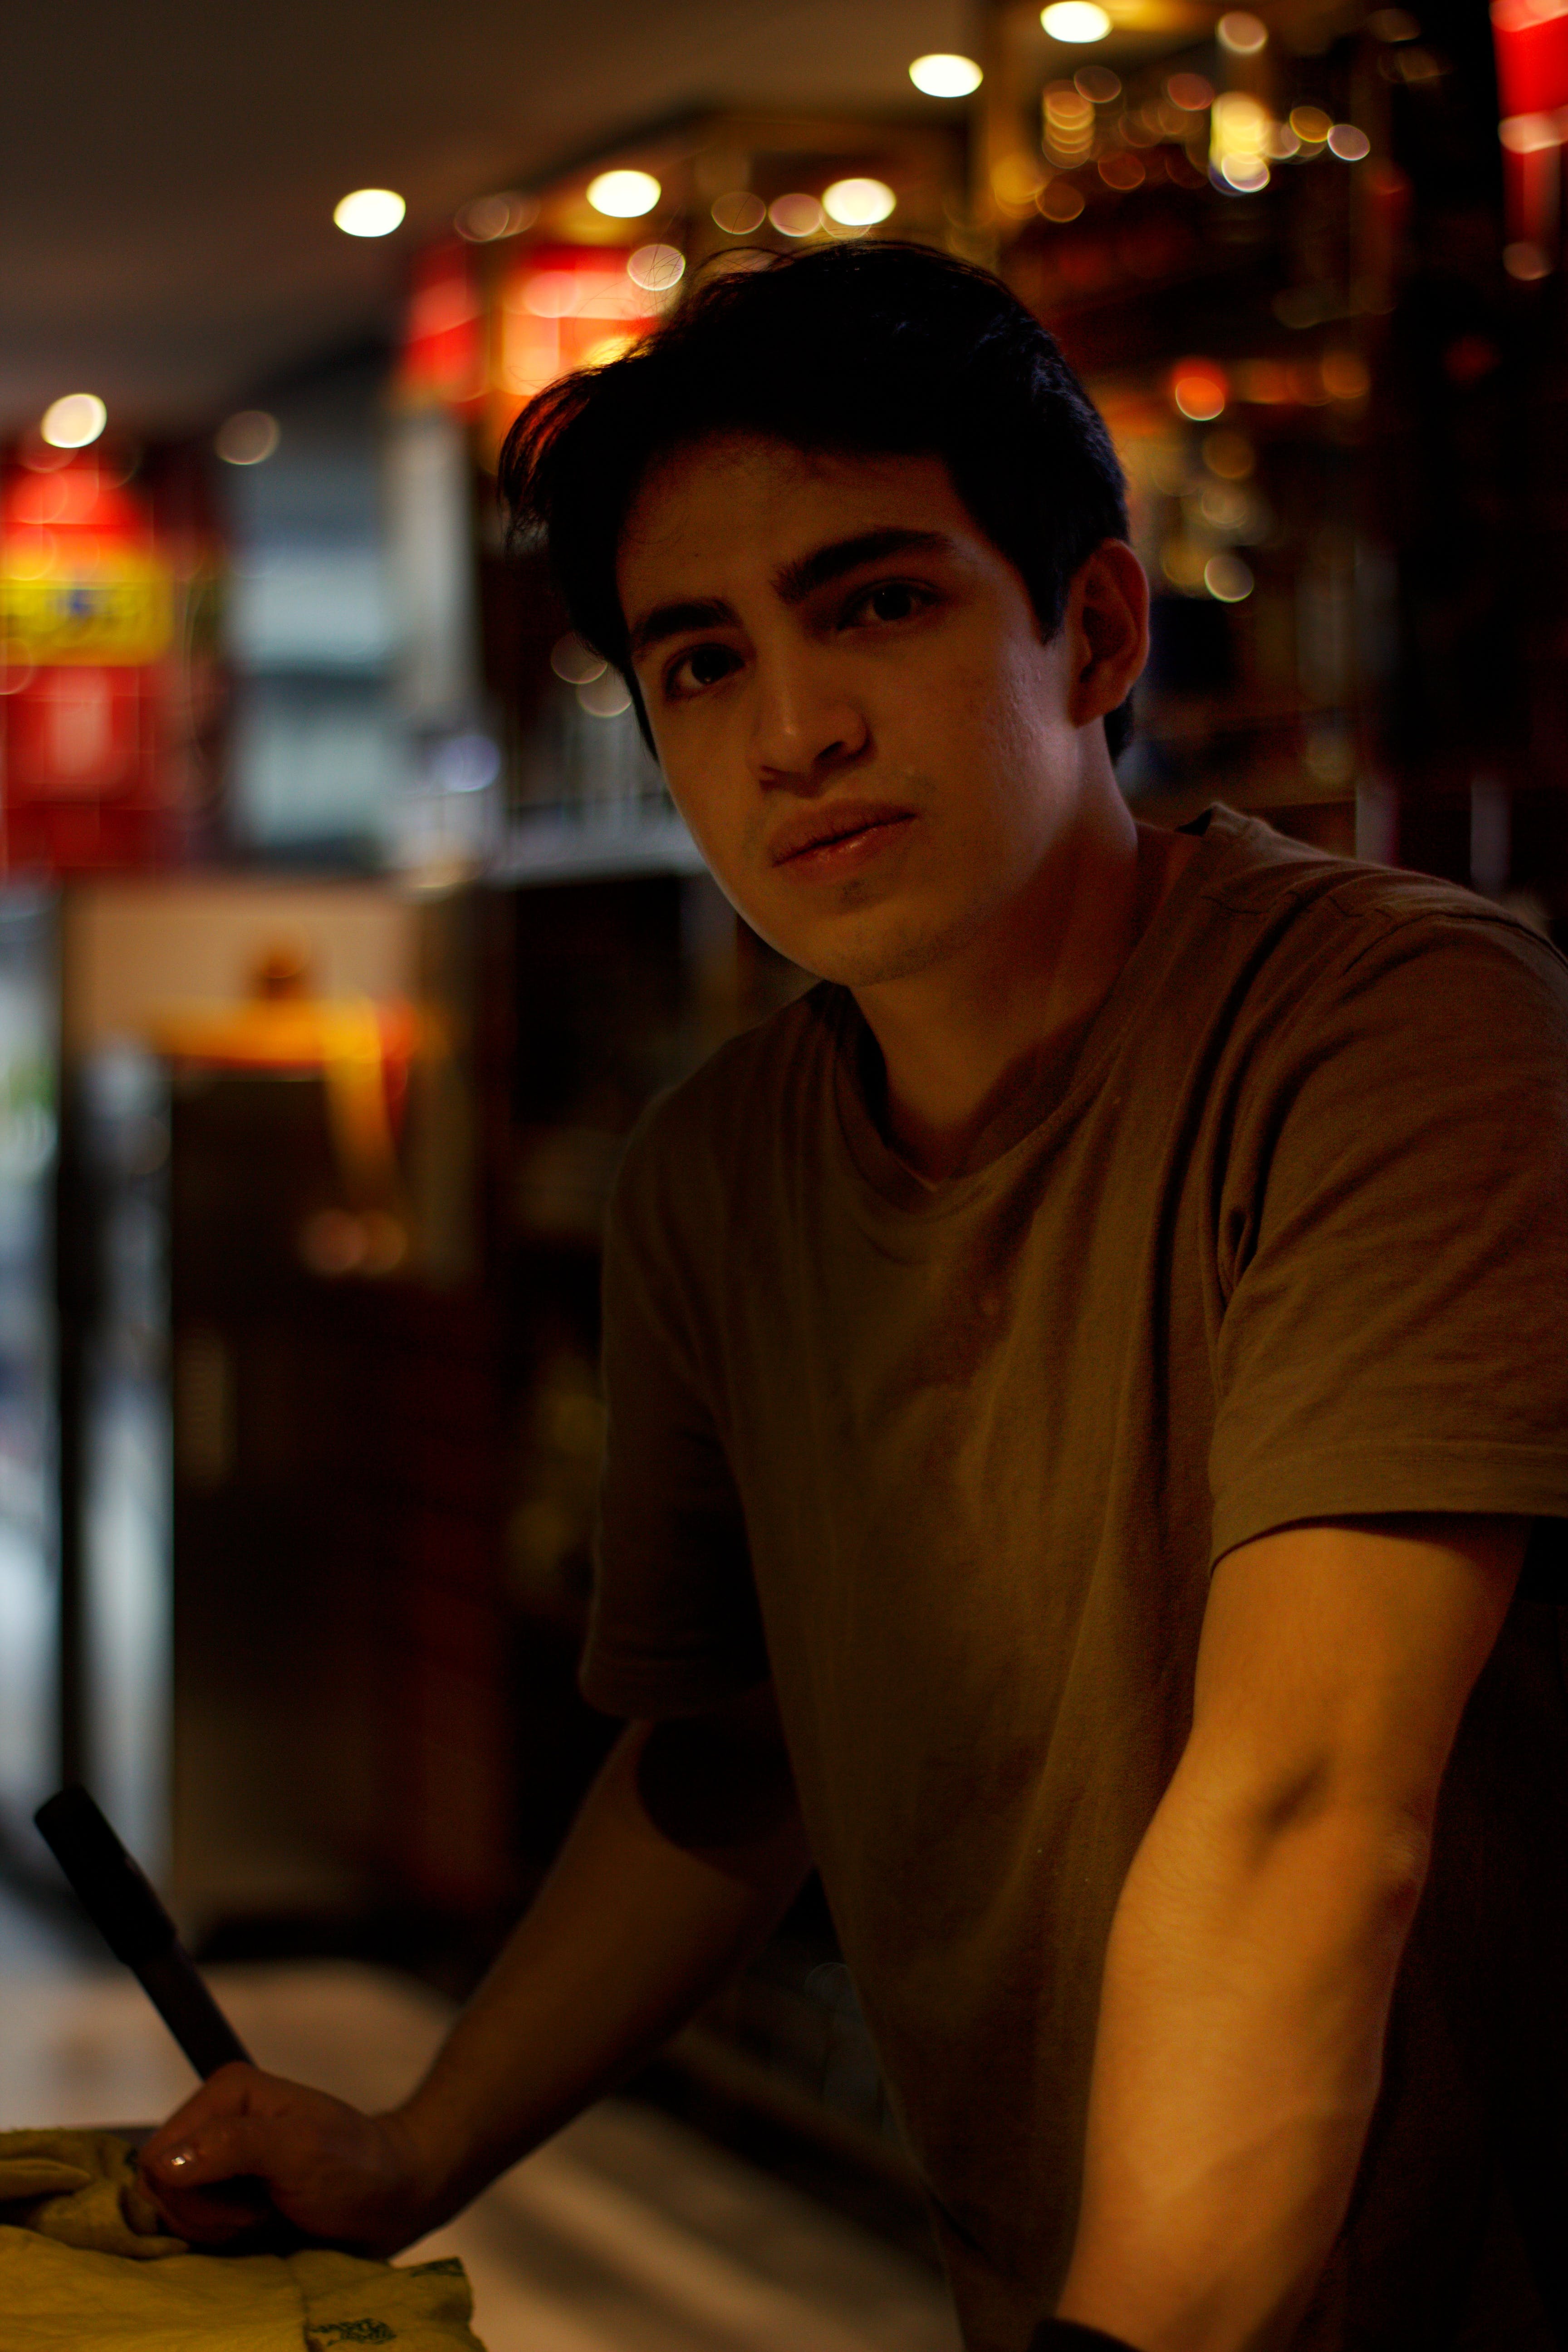 A young man standing at a bar | Source: Pexels